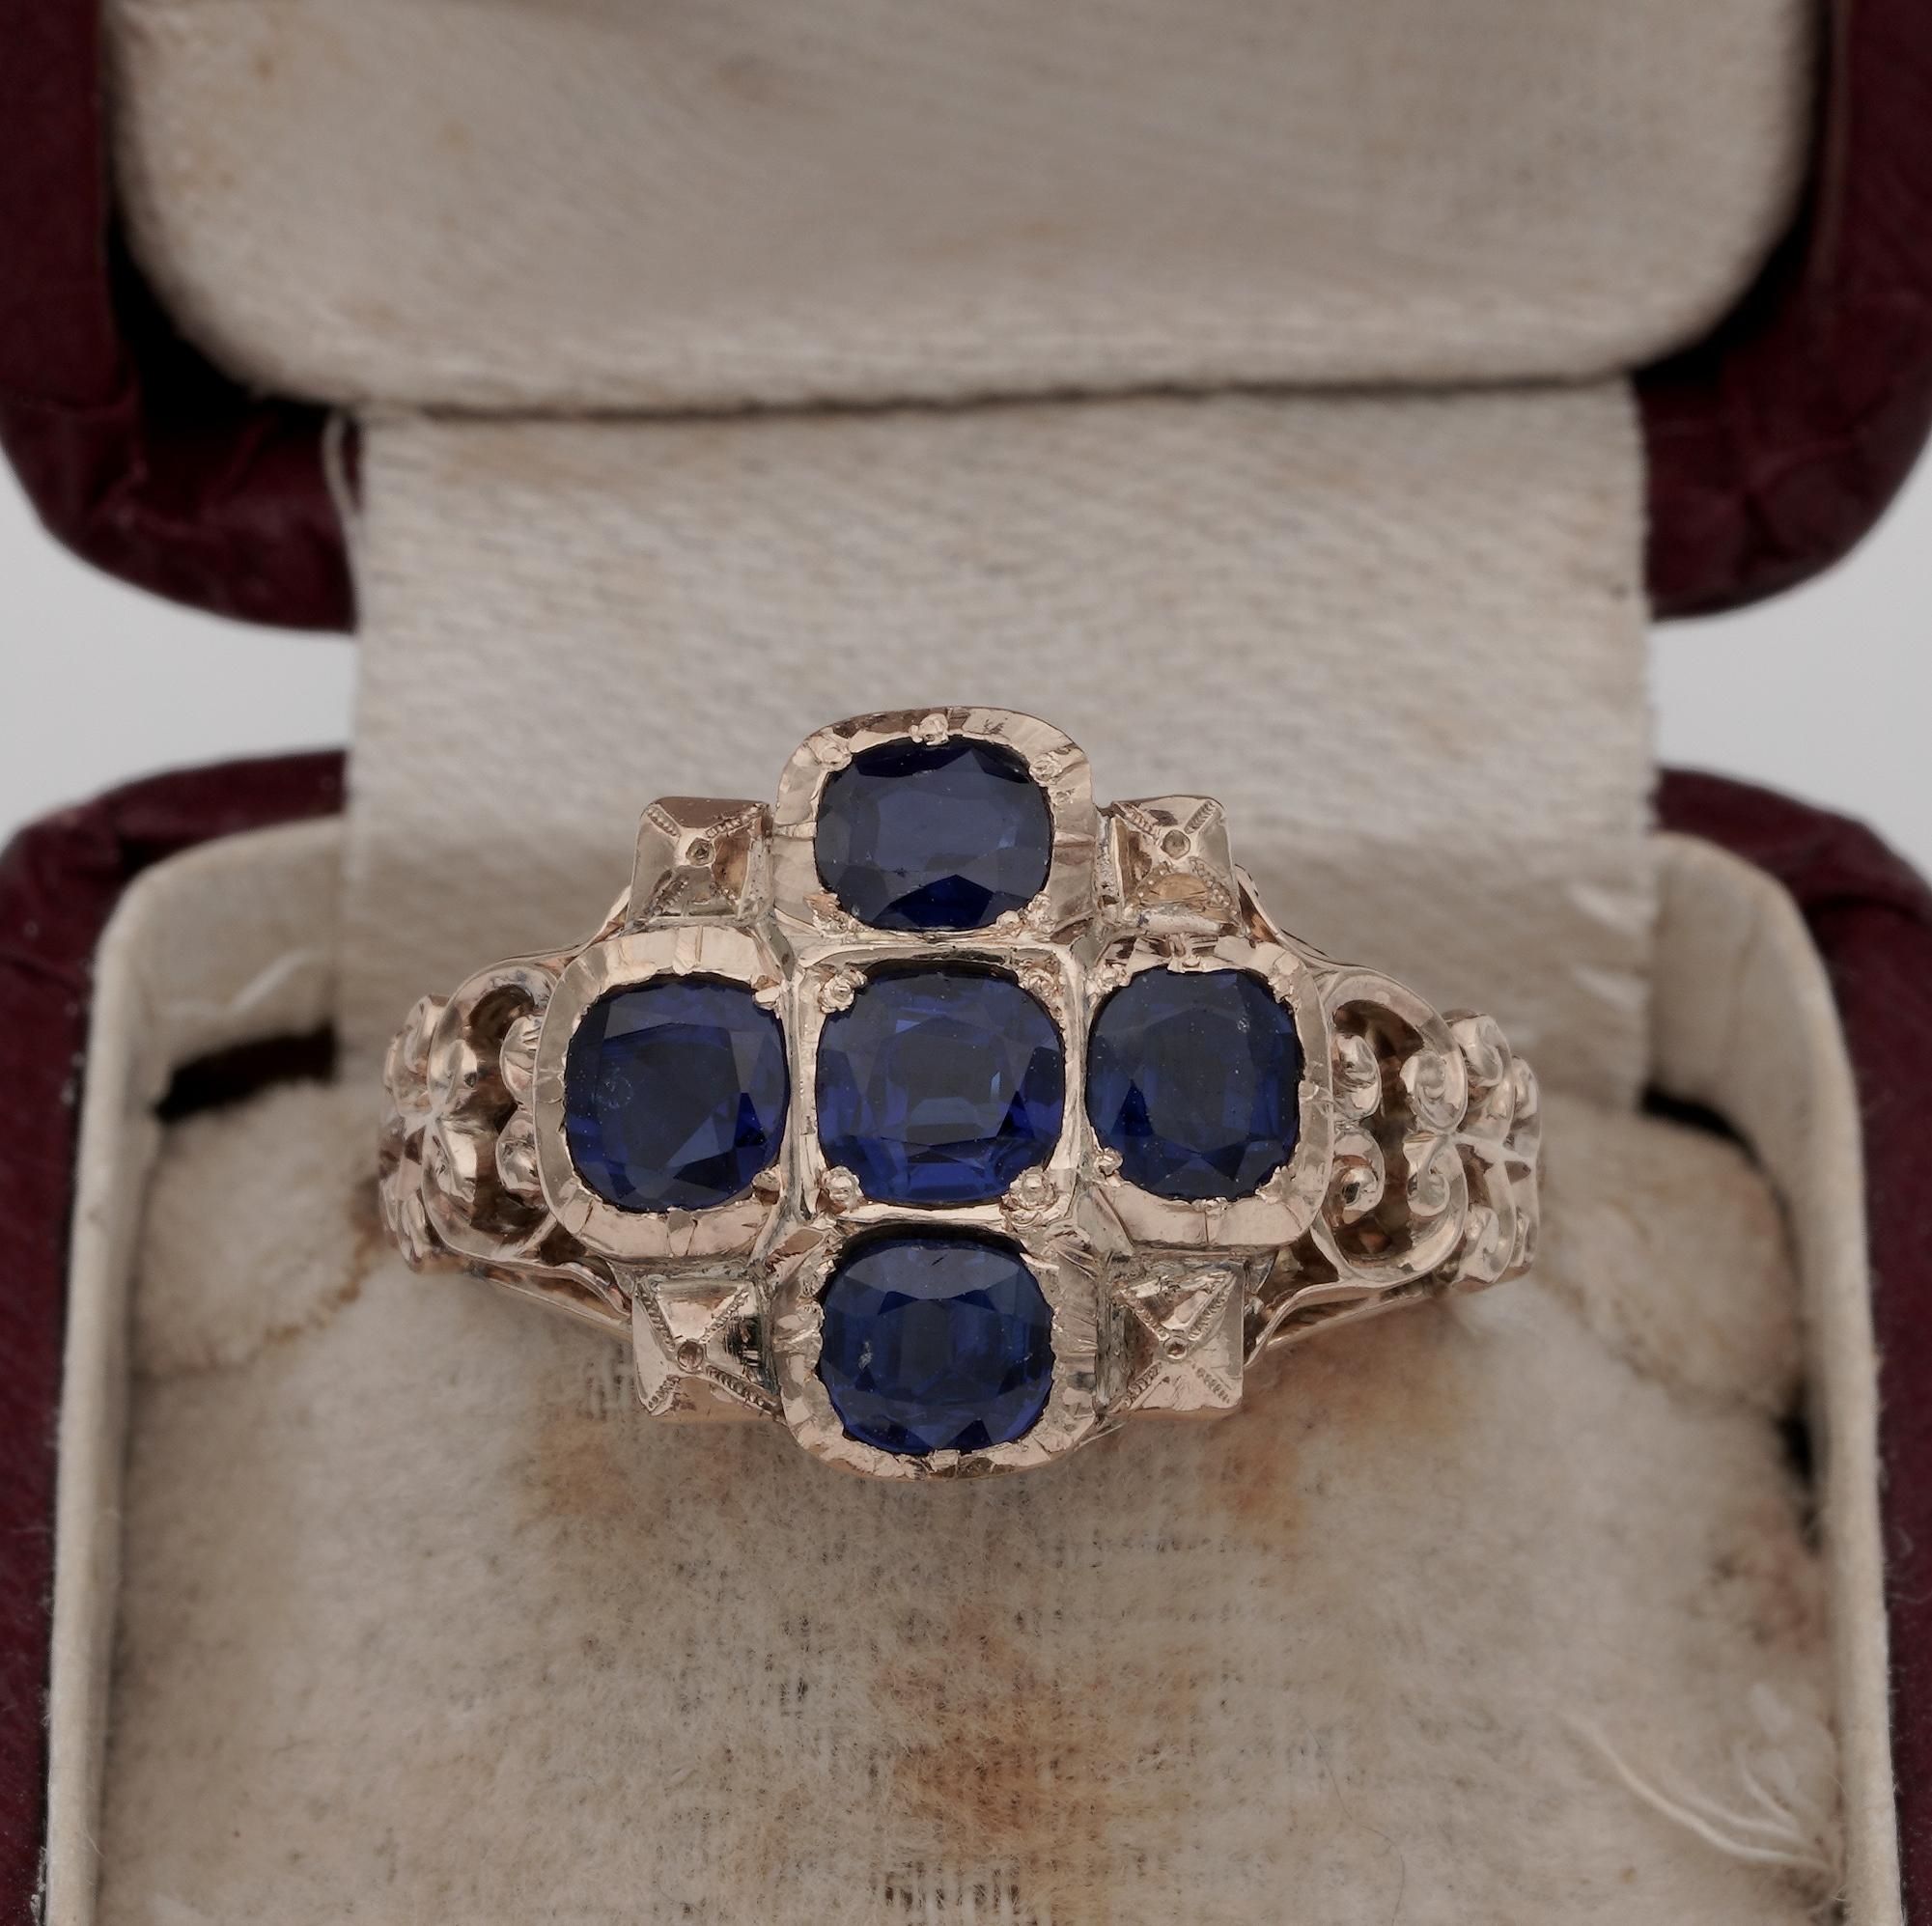 Dreaming the Blue

Rarity ring from 1820 ca
Magnificent representation of beauty of the early 1800 with a distinctive mount richly scrolled- 18 KT tested , bears hallmarks not easy to read, probably French
Crown displays five superb quality antique